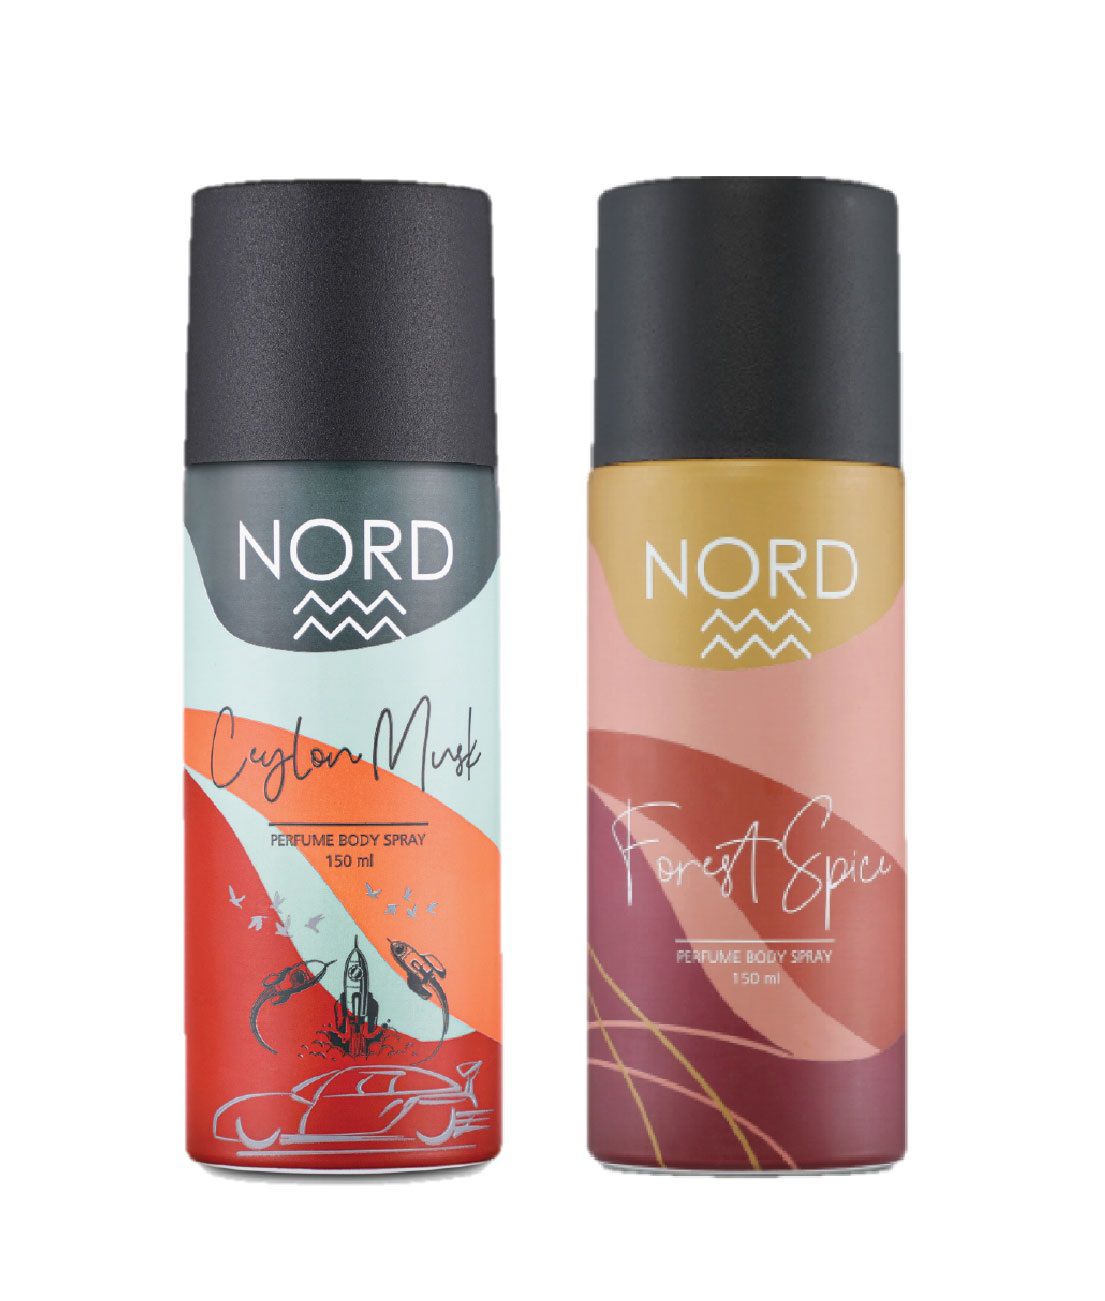     			NORD Deodorant Body Spray - Forest Spice and Ceylon Musk 150 ml each (Pack of 2)